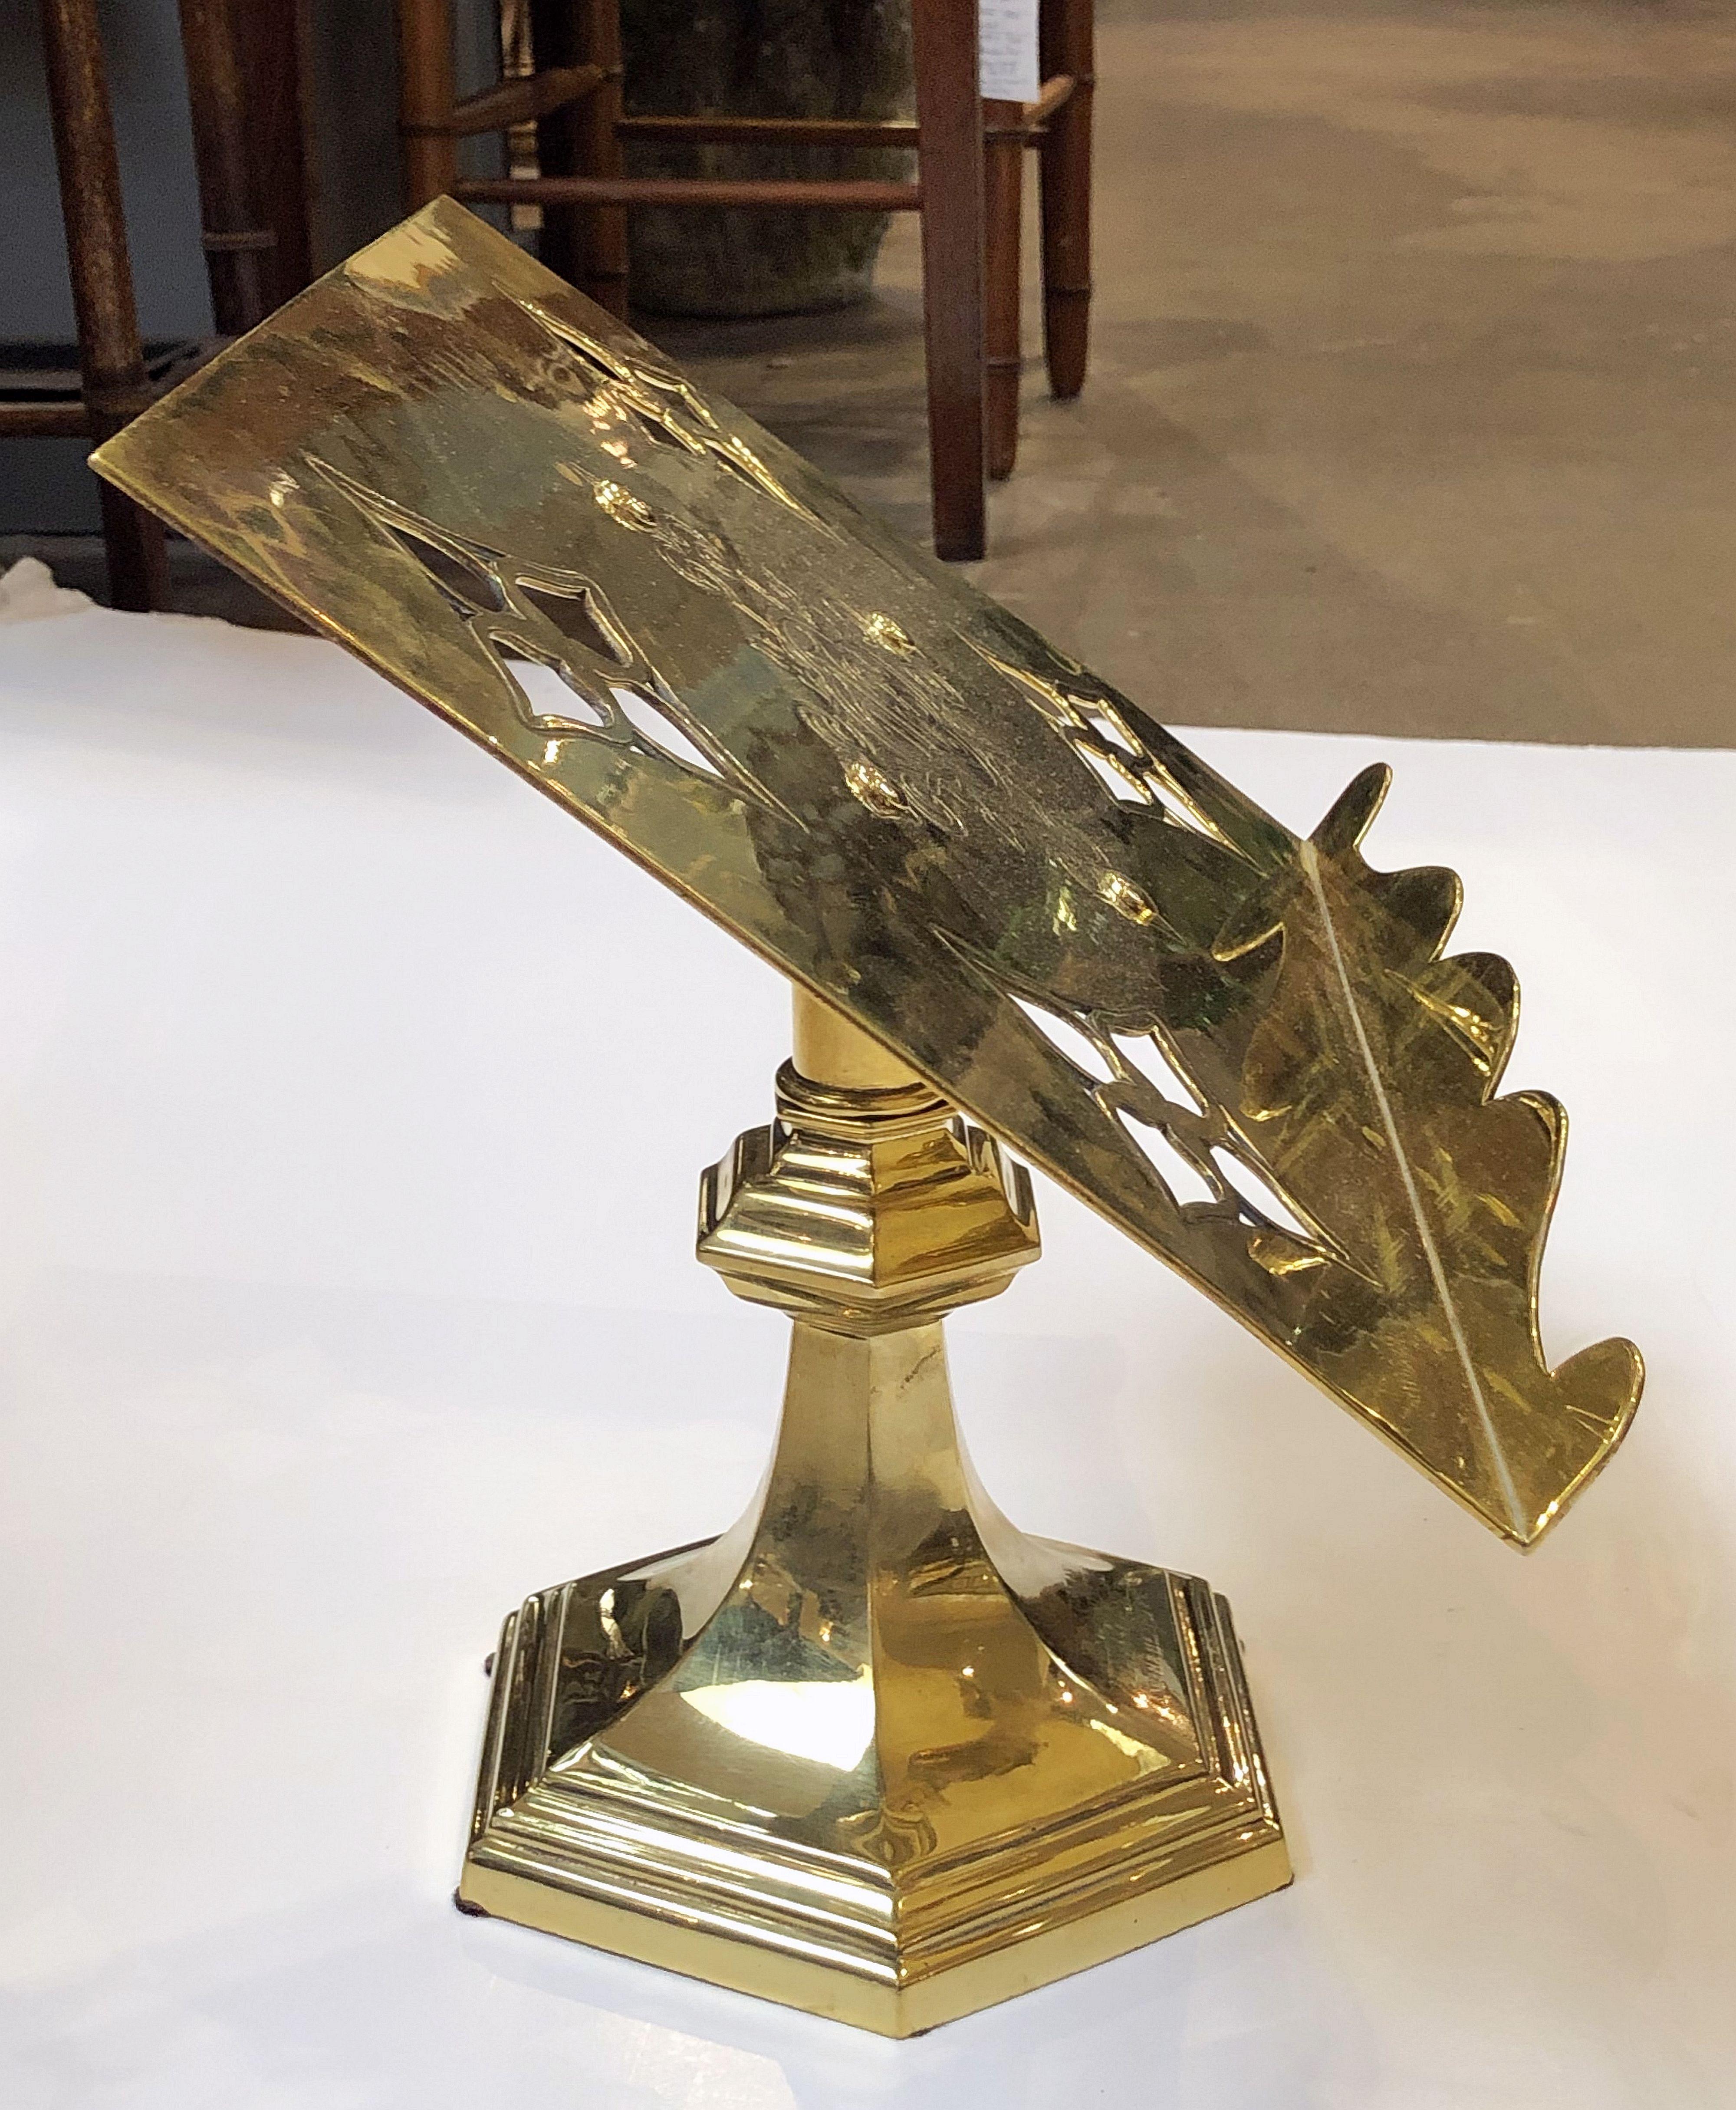 20th Century English Lectern or Book Stand of Brass